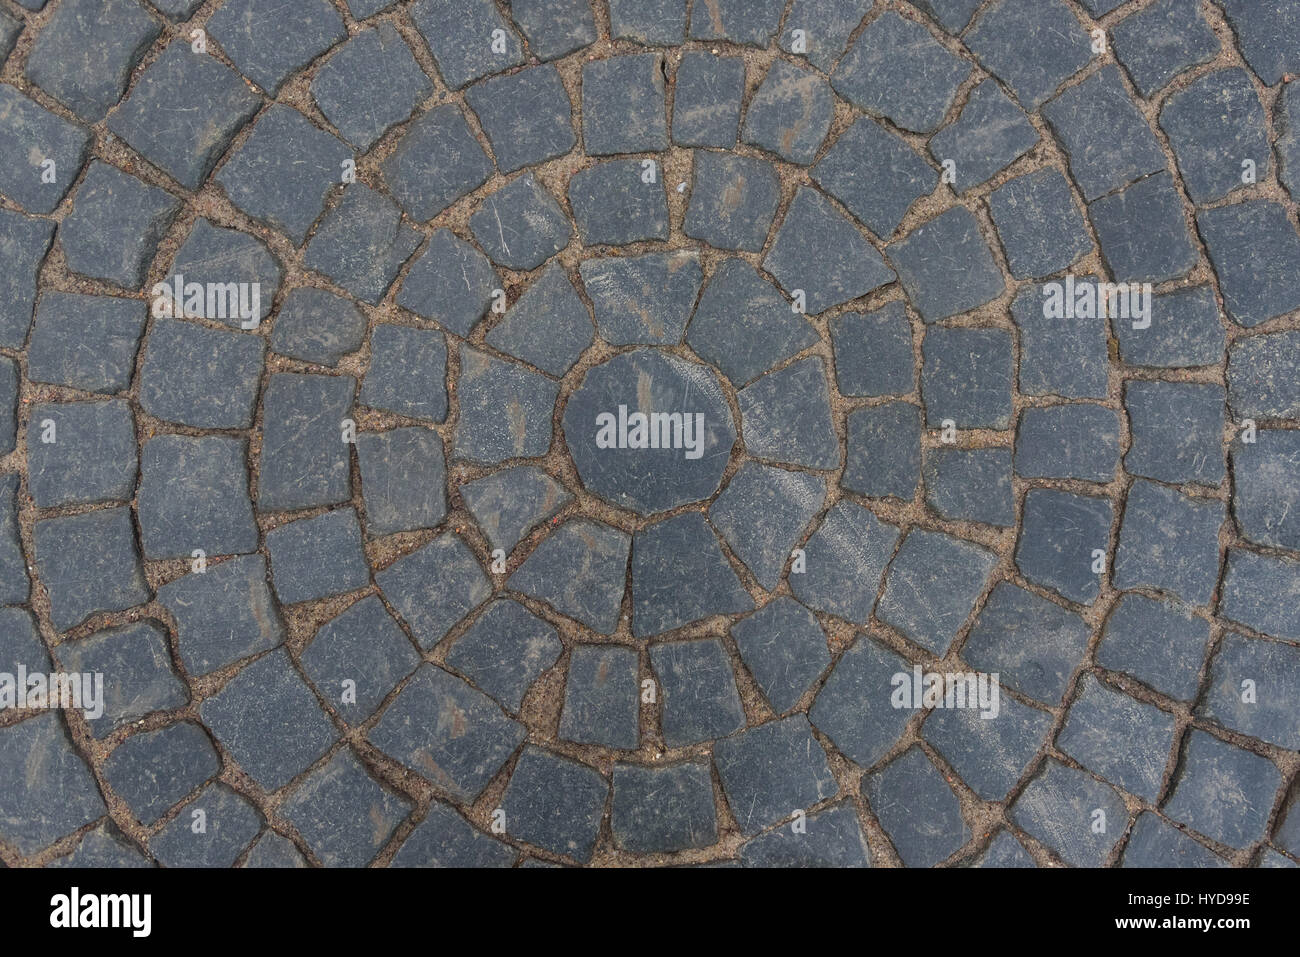 Gray paving stone paved with a pattern circule Stock Photo